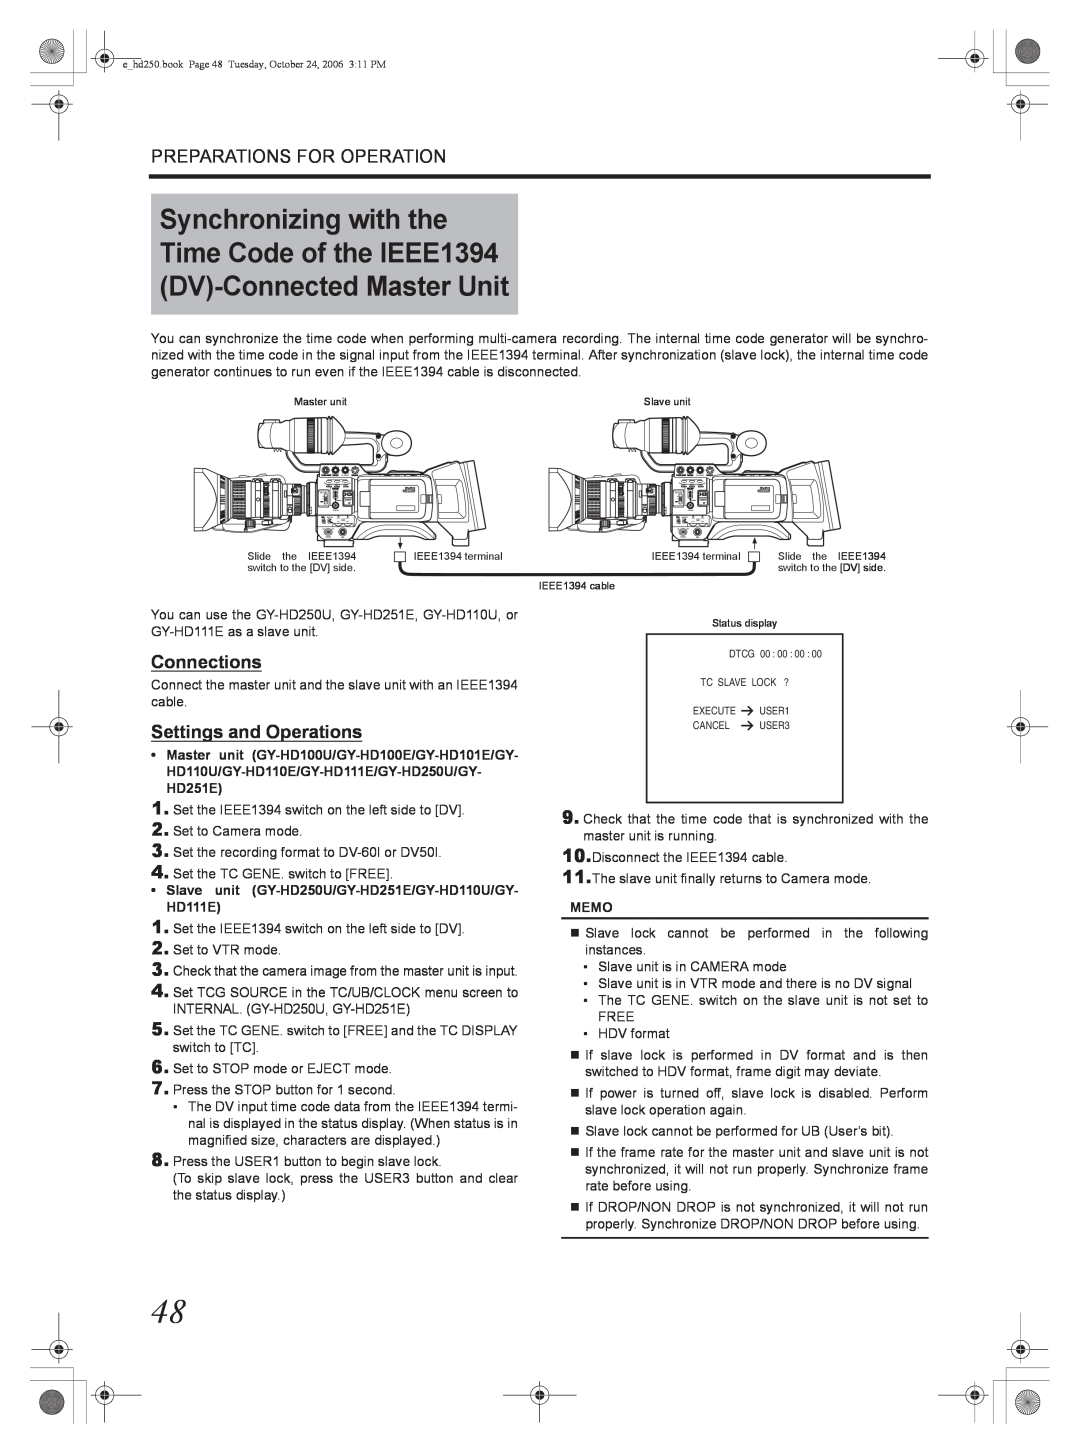 JVC manual Connections, Settings and Operations, Slave unit GY-HD250U/GY-HD251E/GY-HD110U/GY- HD111E, Memo 